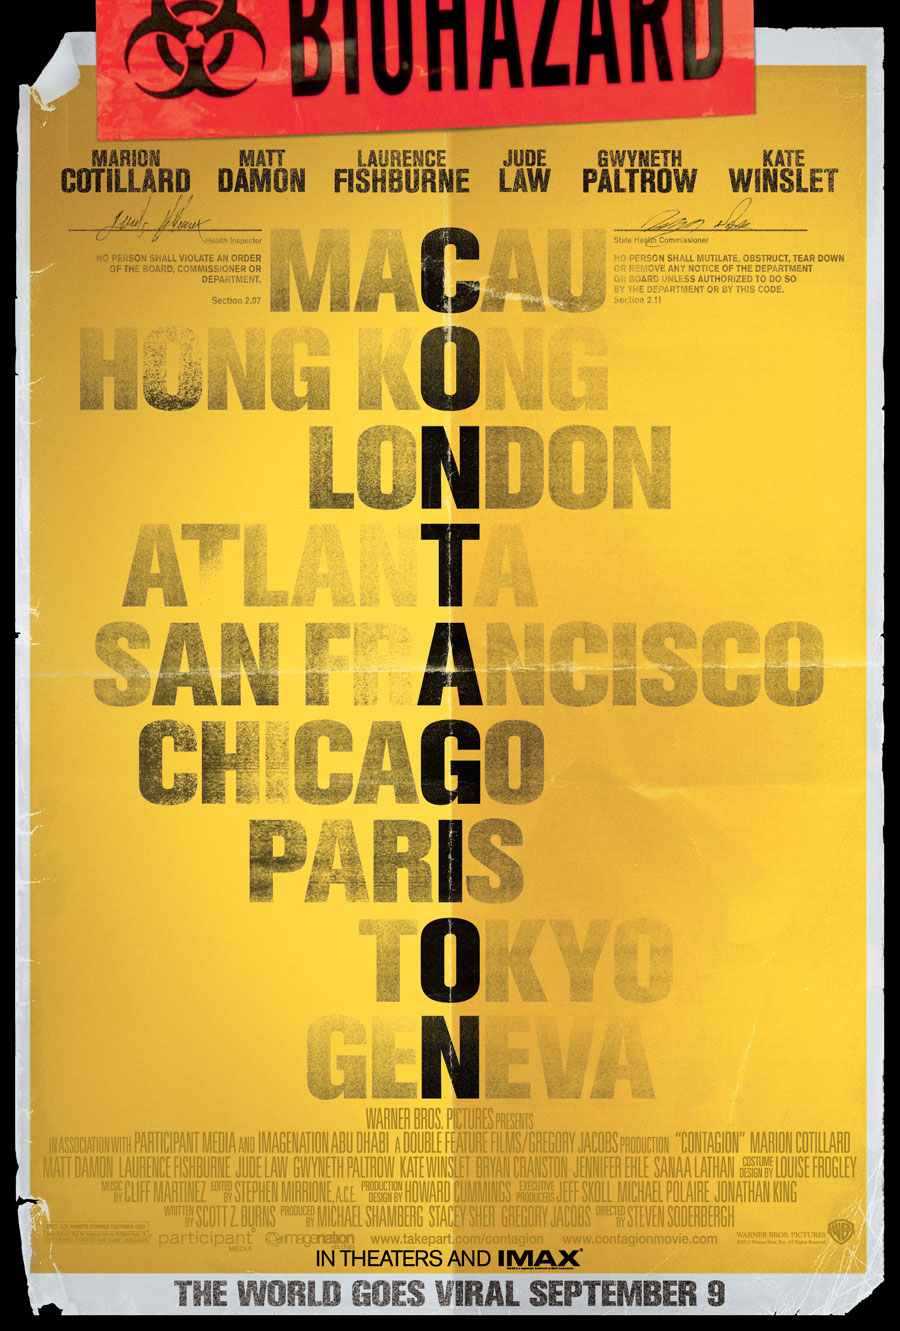 contagion_posters_003.jpg